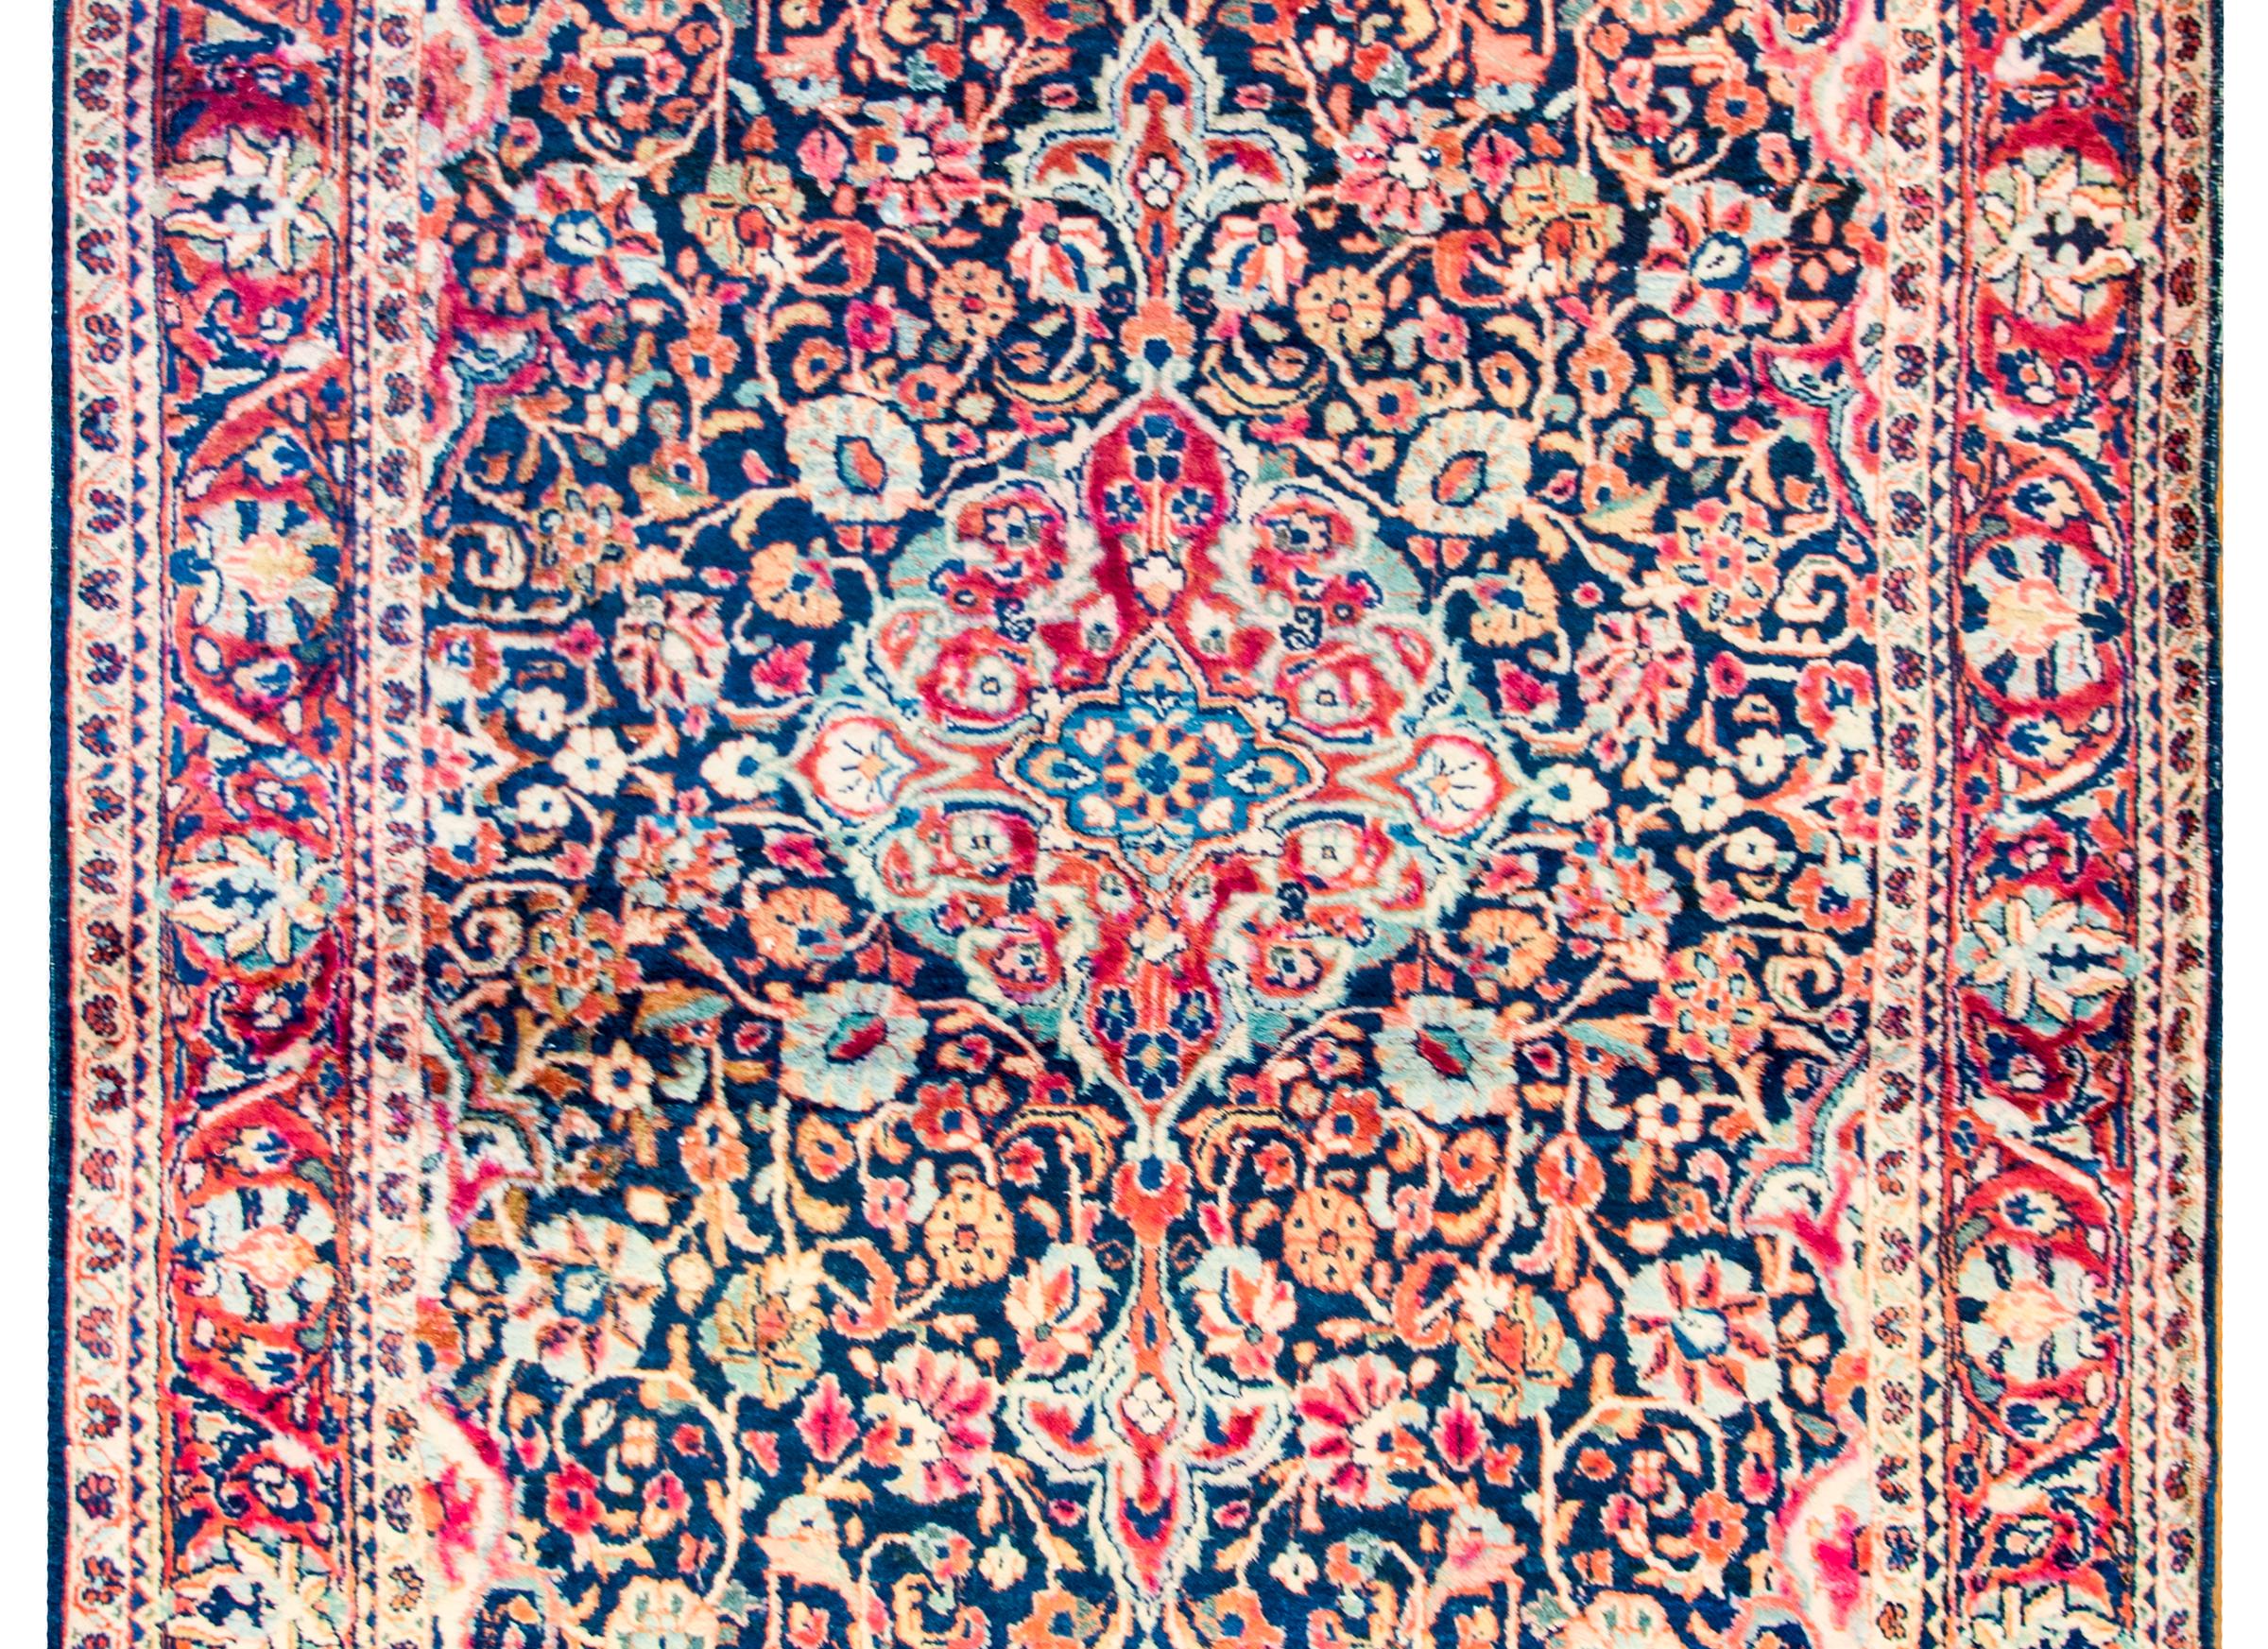 An exceptional early 20th century Persian Kashan rug with a densely woven field and medallion of myriad flowers, leaves, and vines, all woven in crimson, indigo, gold, pink, and cream colored vegetable dyed wool. The border is complex and as densely